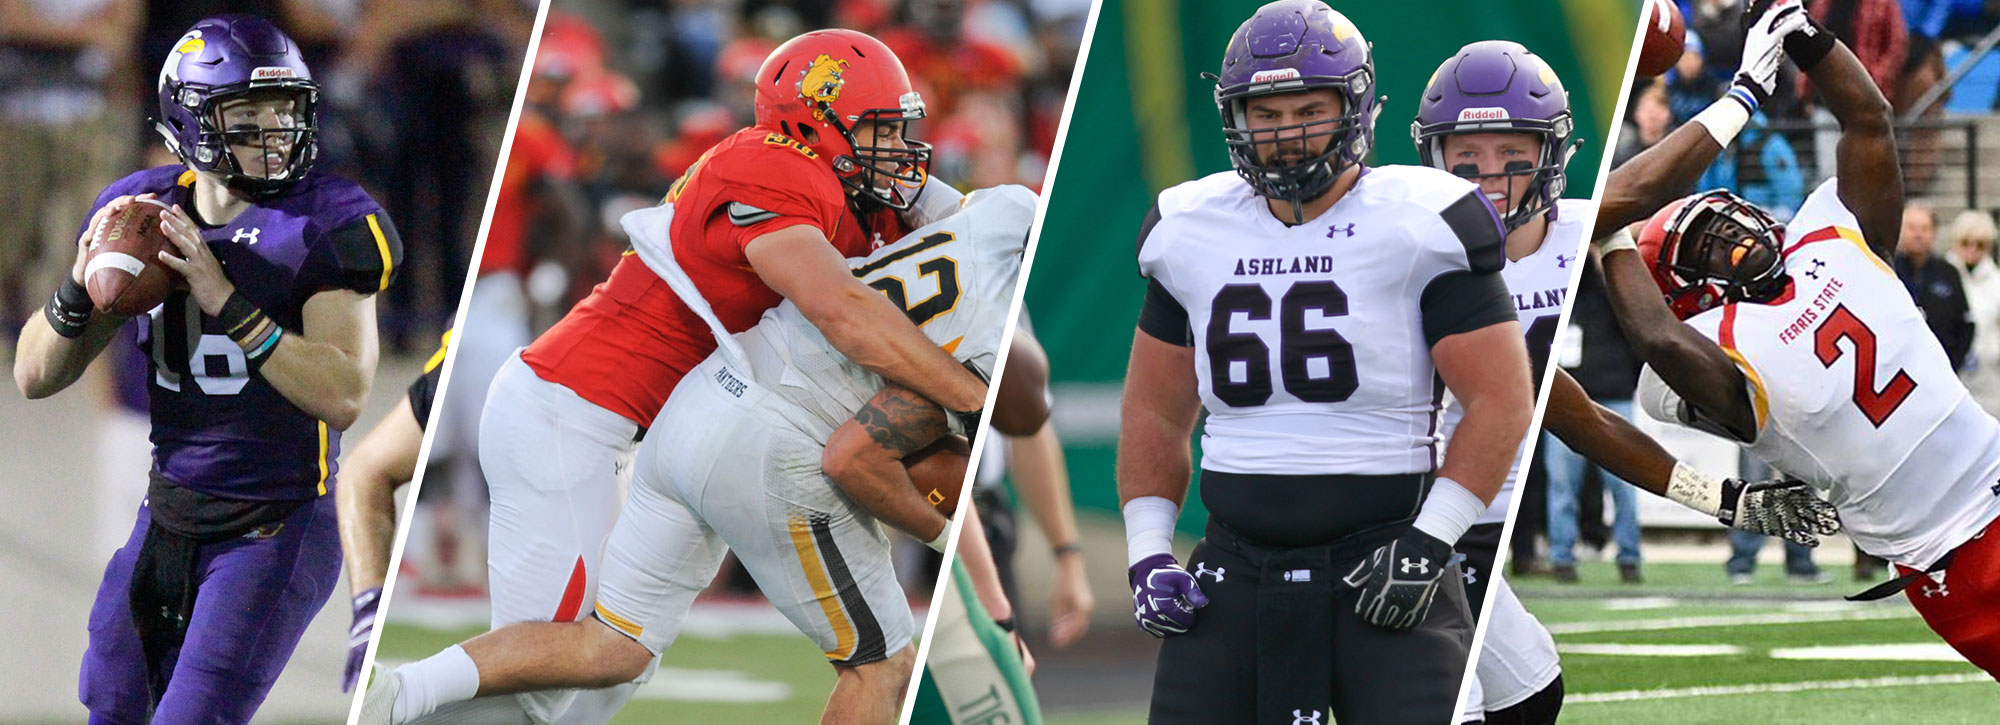 Four #GLIACFB Standouts Earn D2CCA All-America Recognition